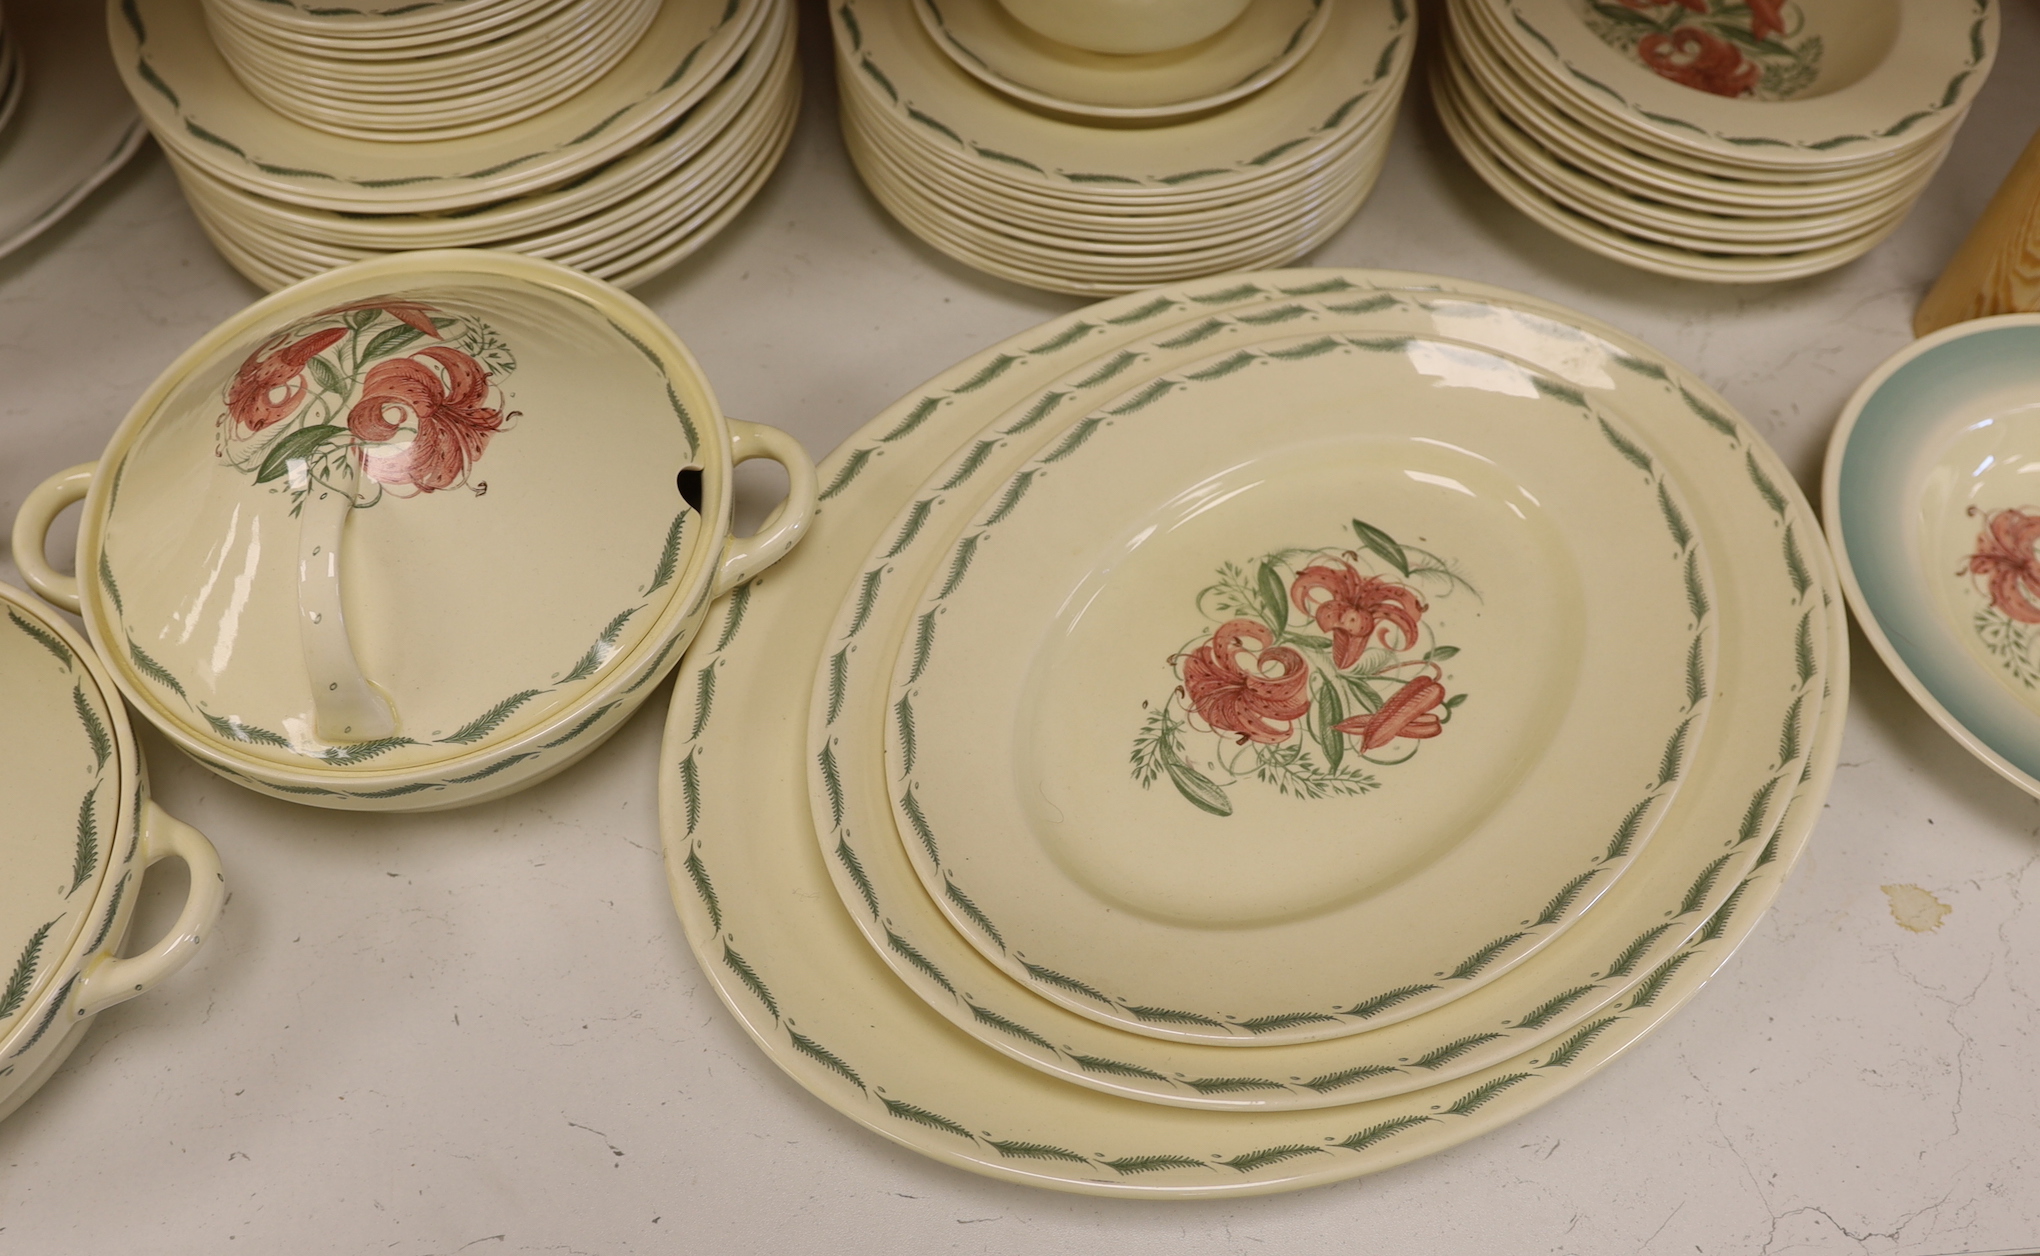 A Susie Copper tiger lily pattern part dinner service, and a Susie Cooper bone china part teaset